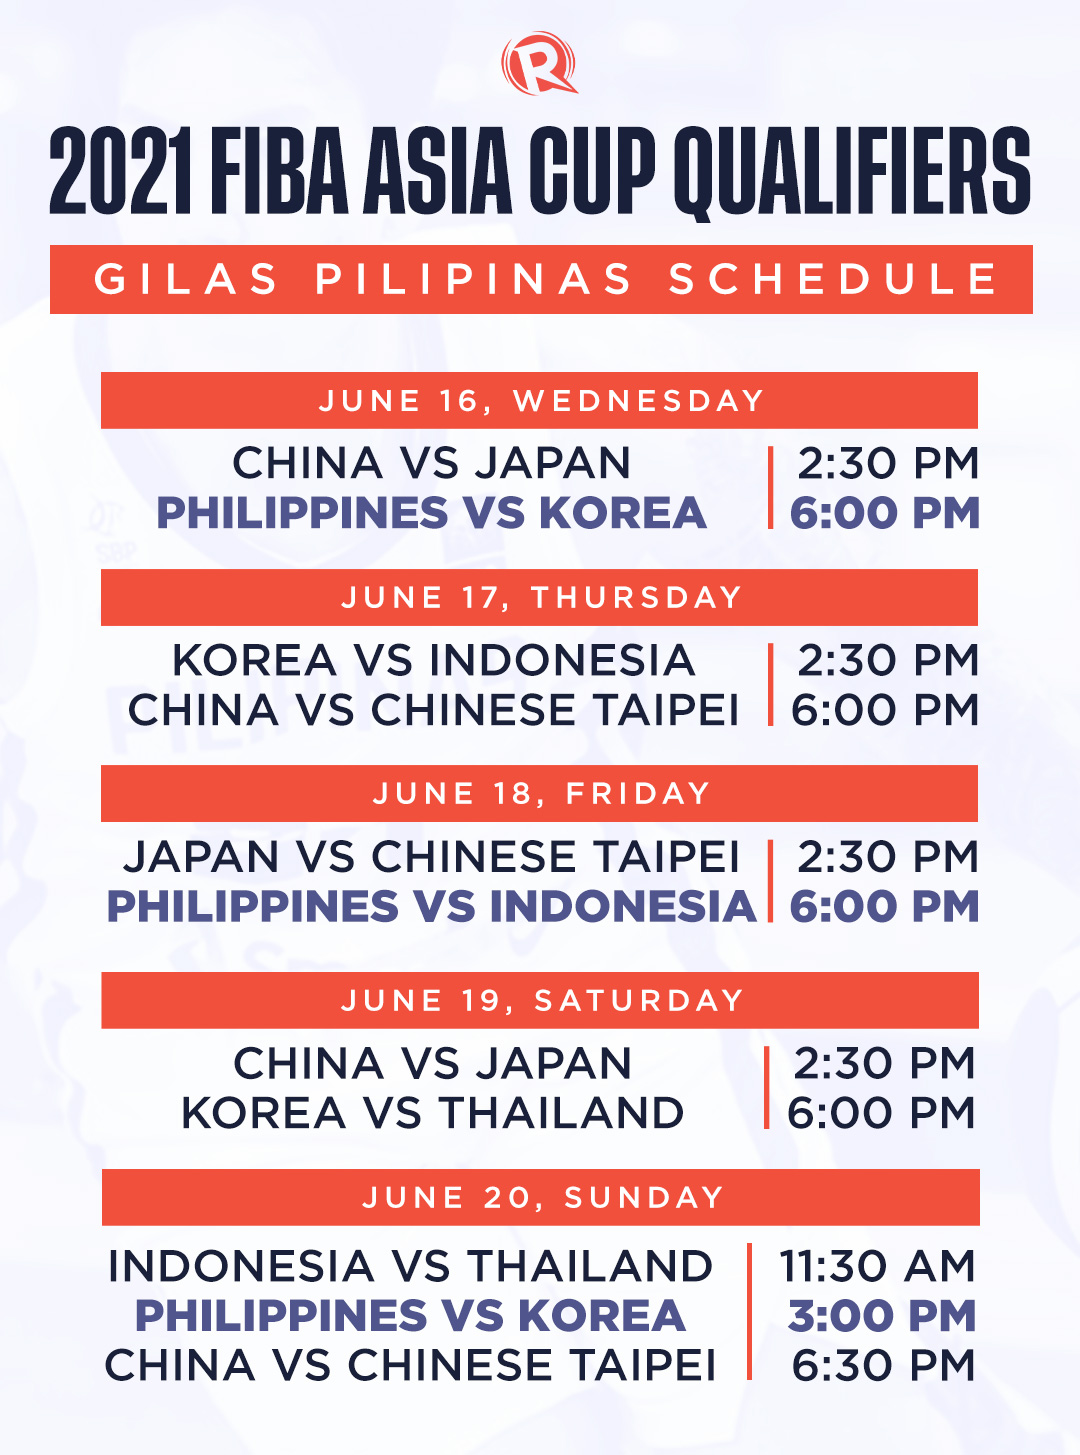 SCHEDULE Gilas Pilipinas at FIBA Asia Cup Qualifiers